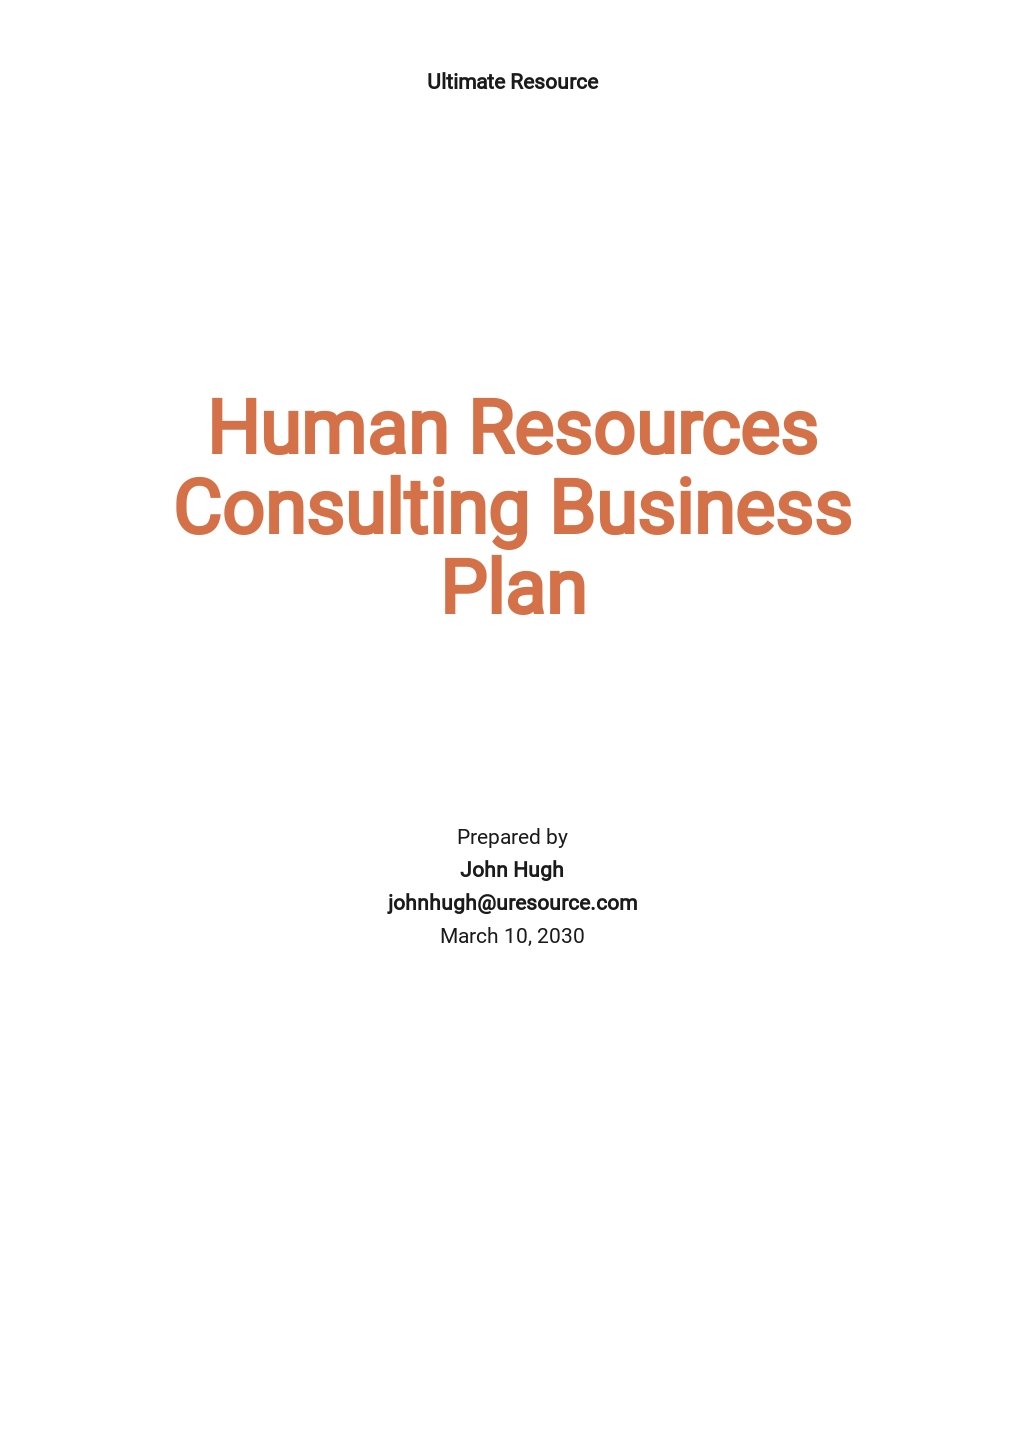 Human Resources Consulting Business Plan Template.jpe